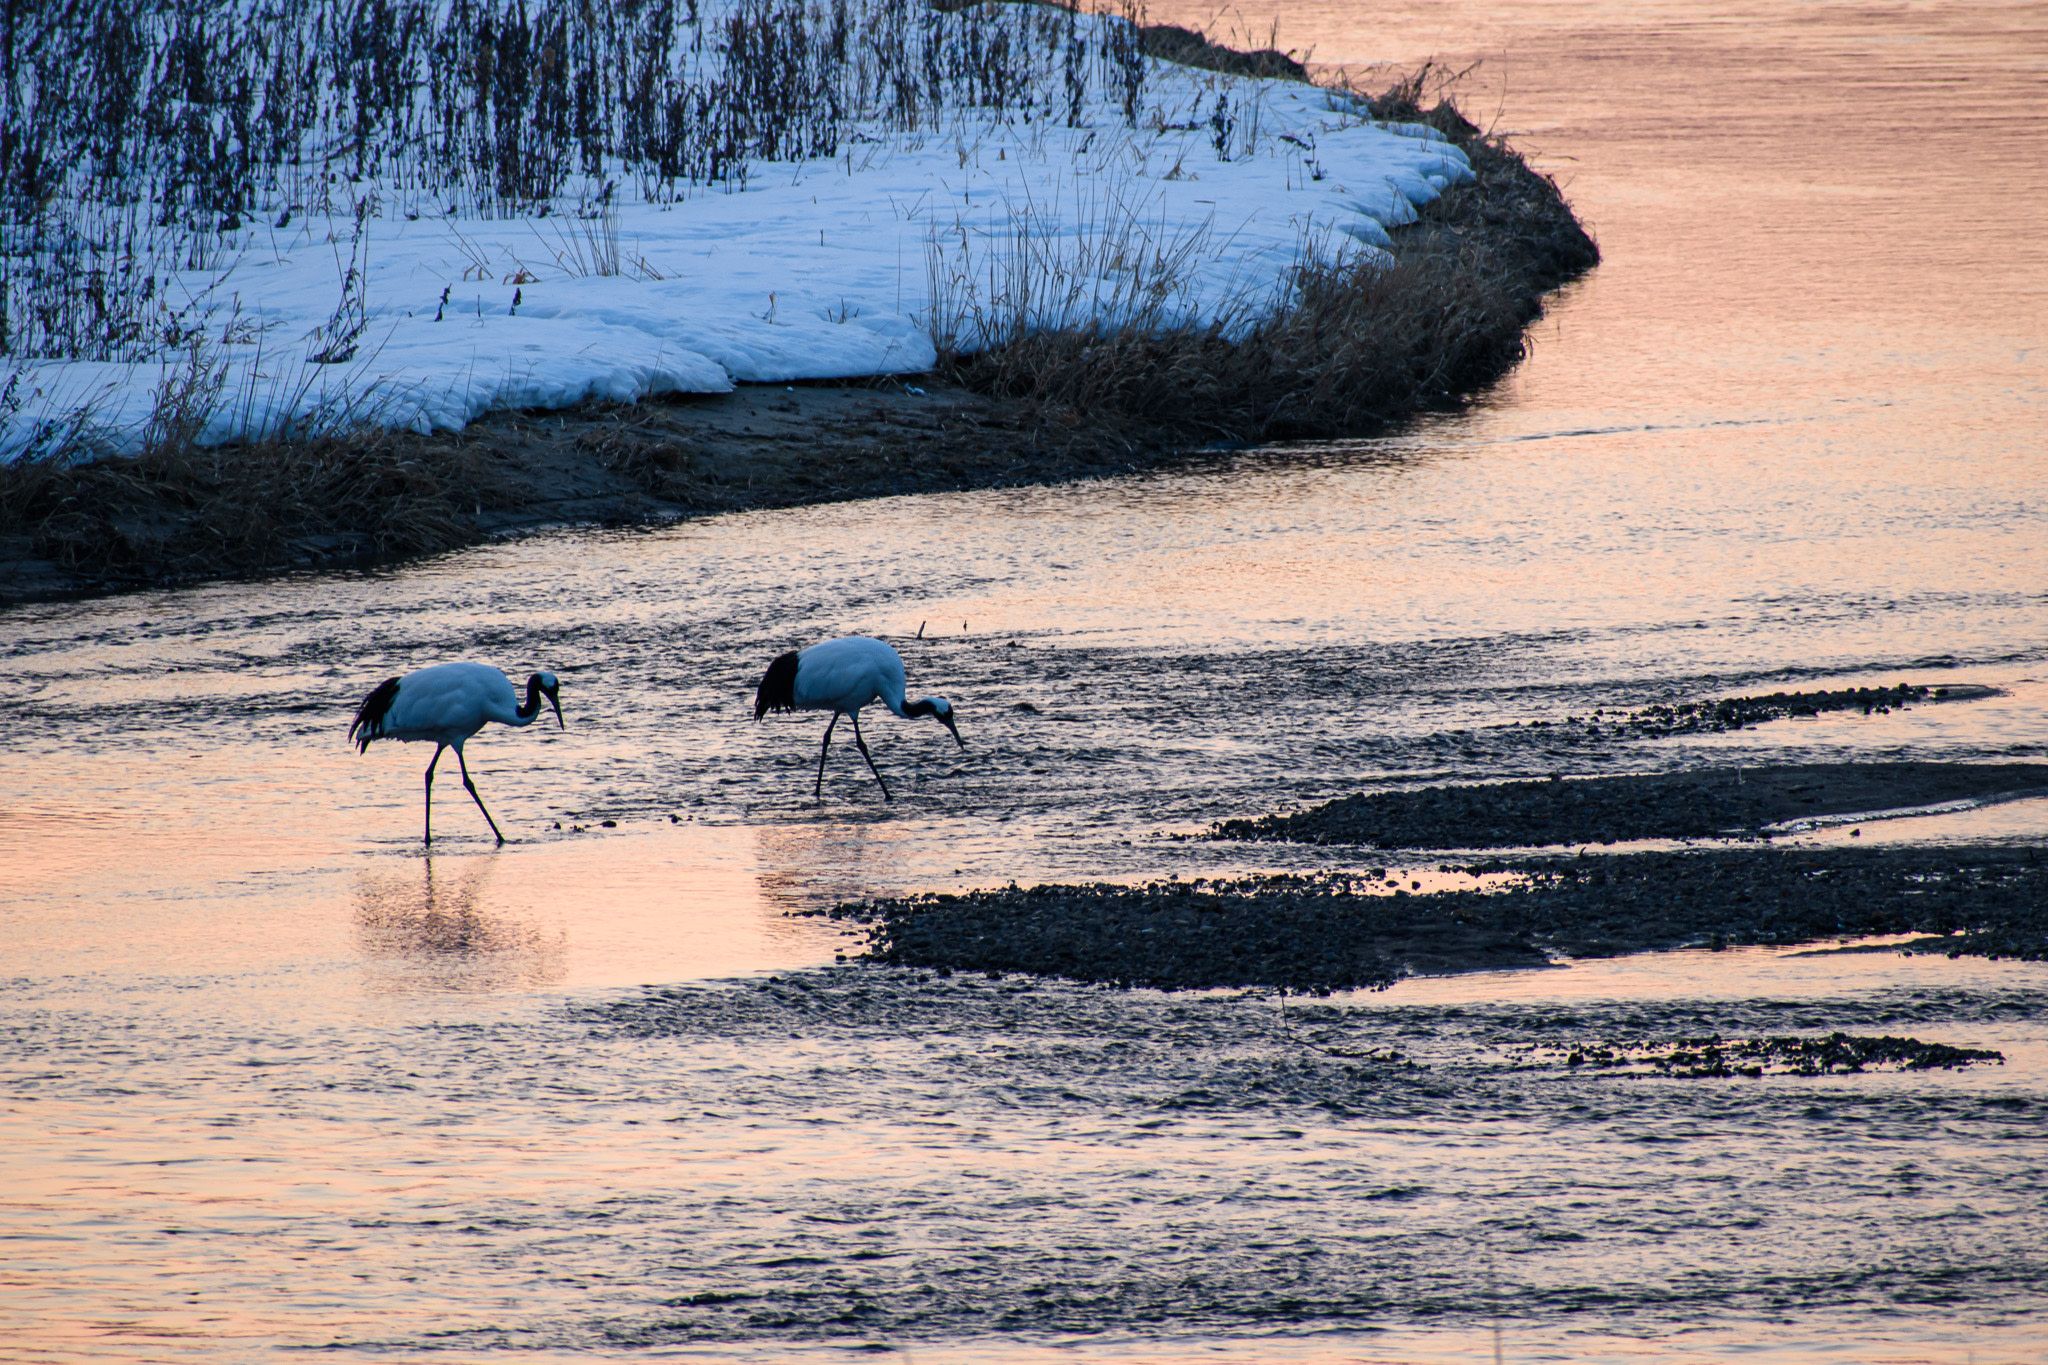 Two cranes walk in the river at sunrise. The water is dyed pink from the rising sun's rays.